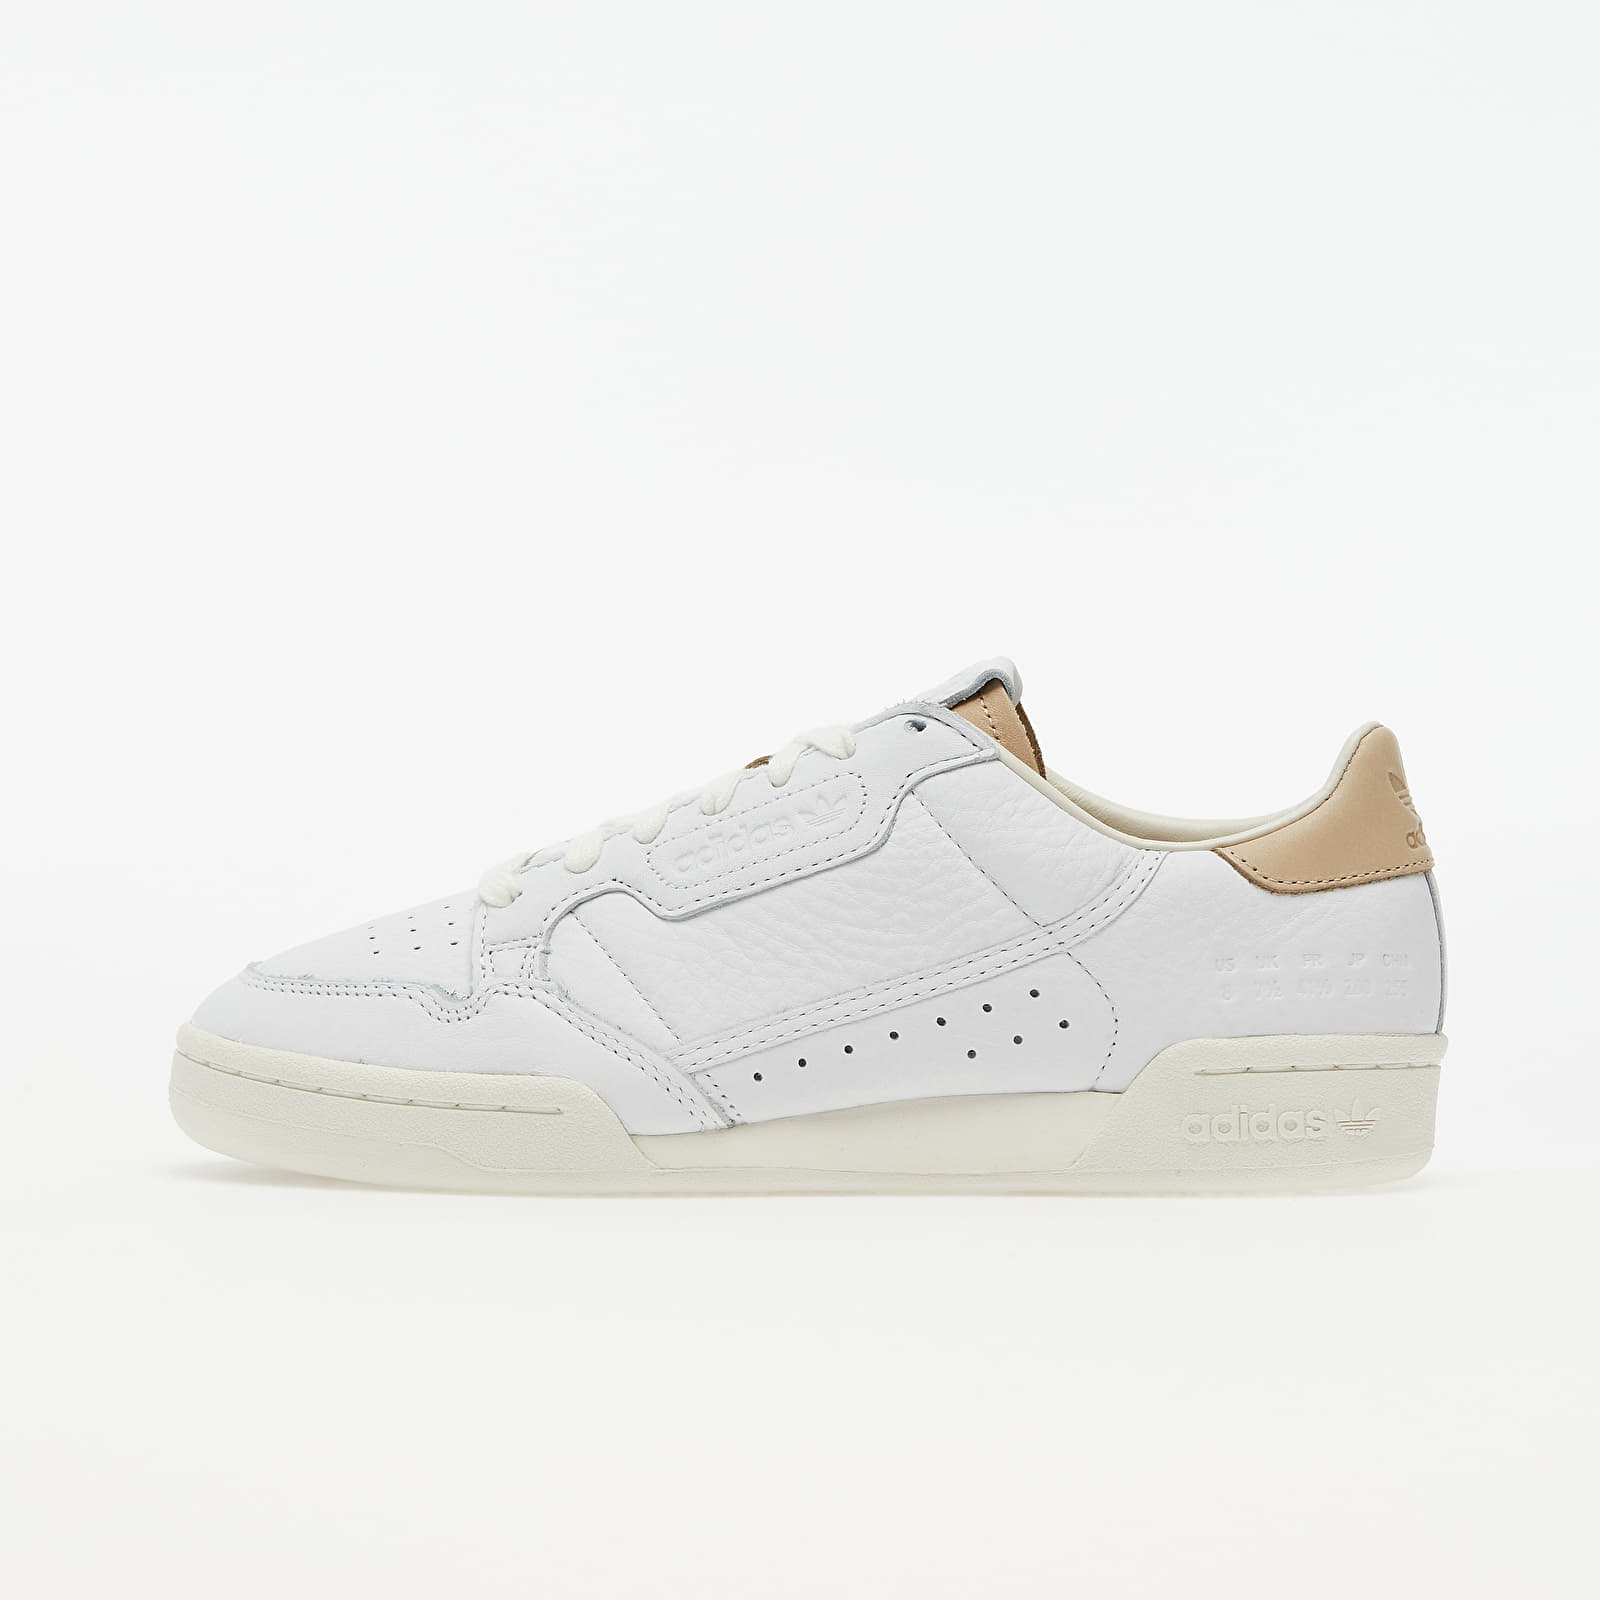 Men's shoes adidas Continental 80 Ftw White/ Ftw White/ Off White